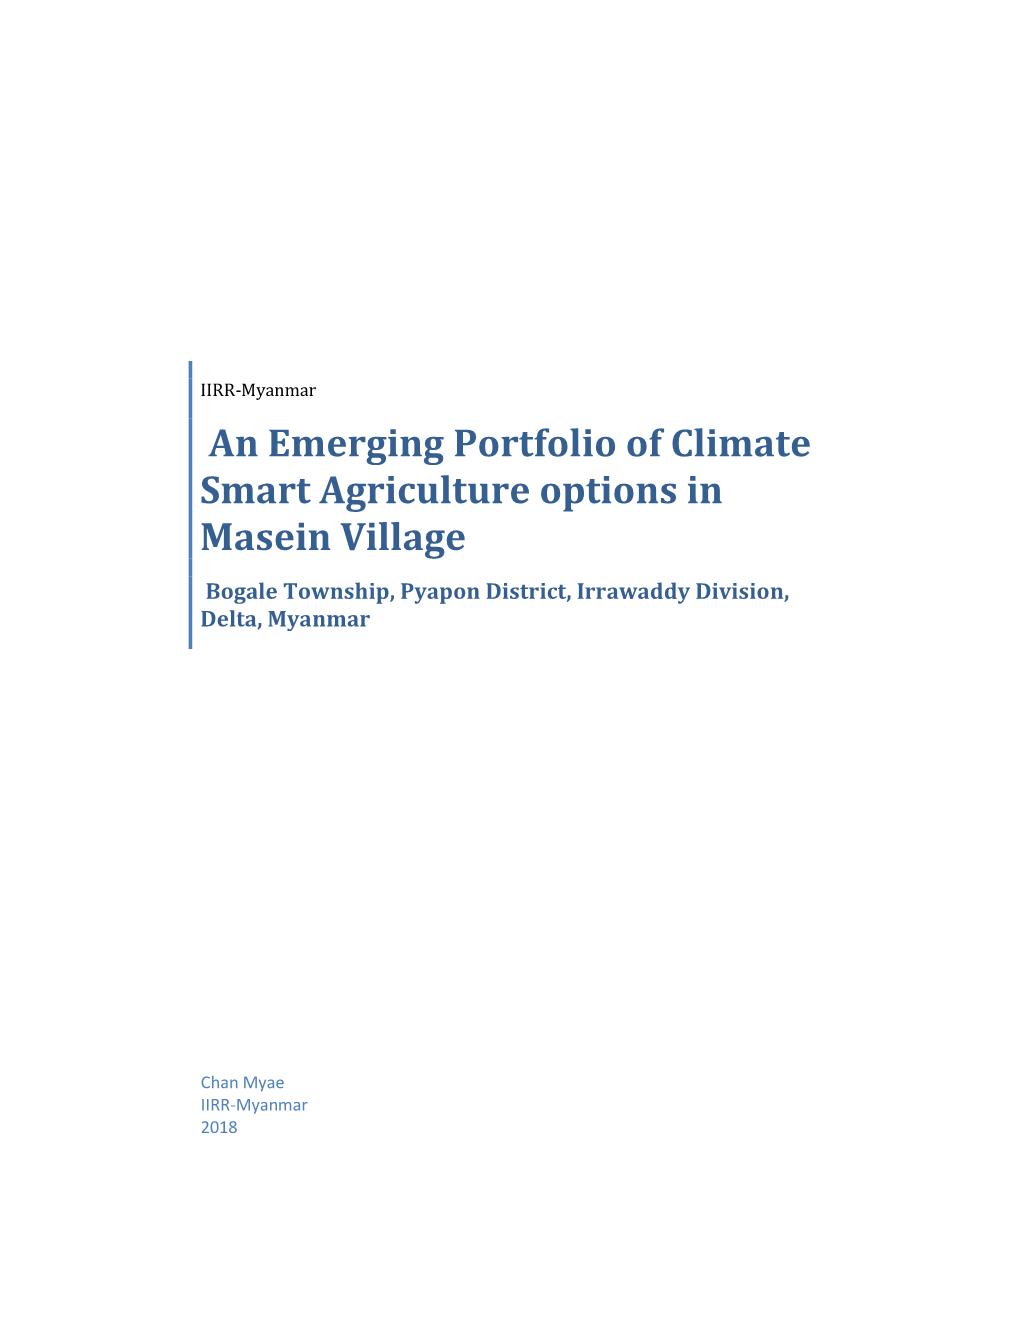 An Emerging Portfolio of Climate Smart Agriculture Options in Masein Village Bogale Township, Pyapon District, Irrawaddy Division, Delta, Myanmar